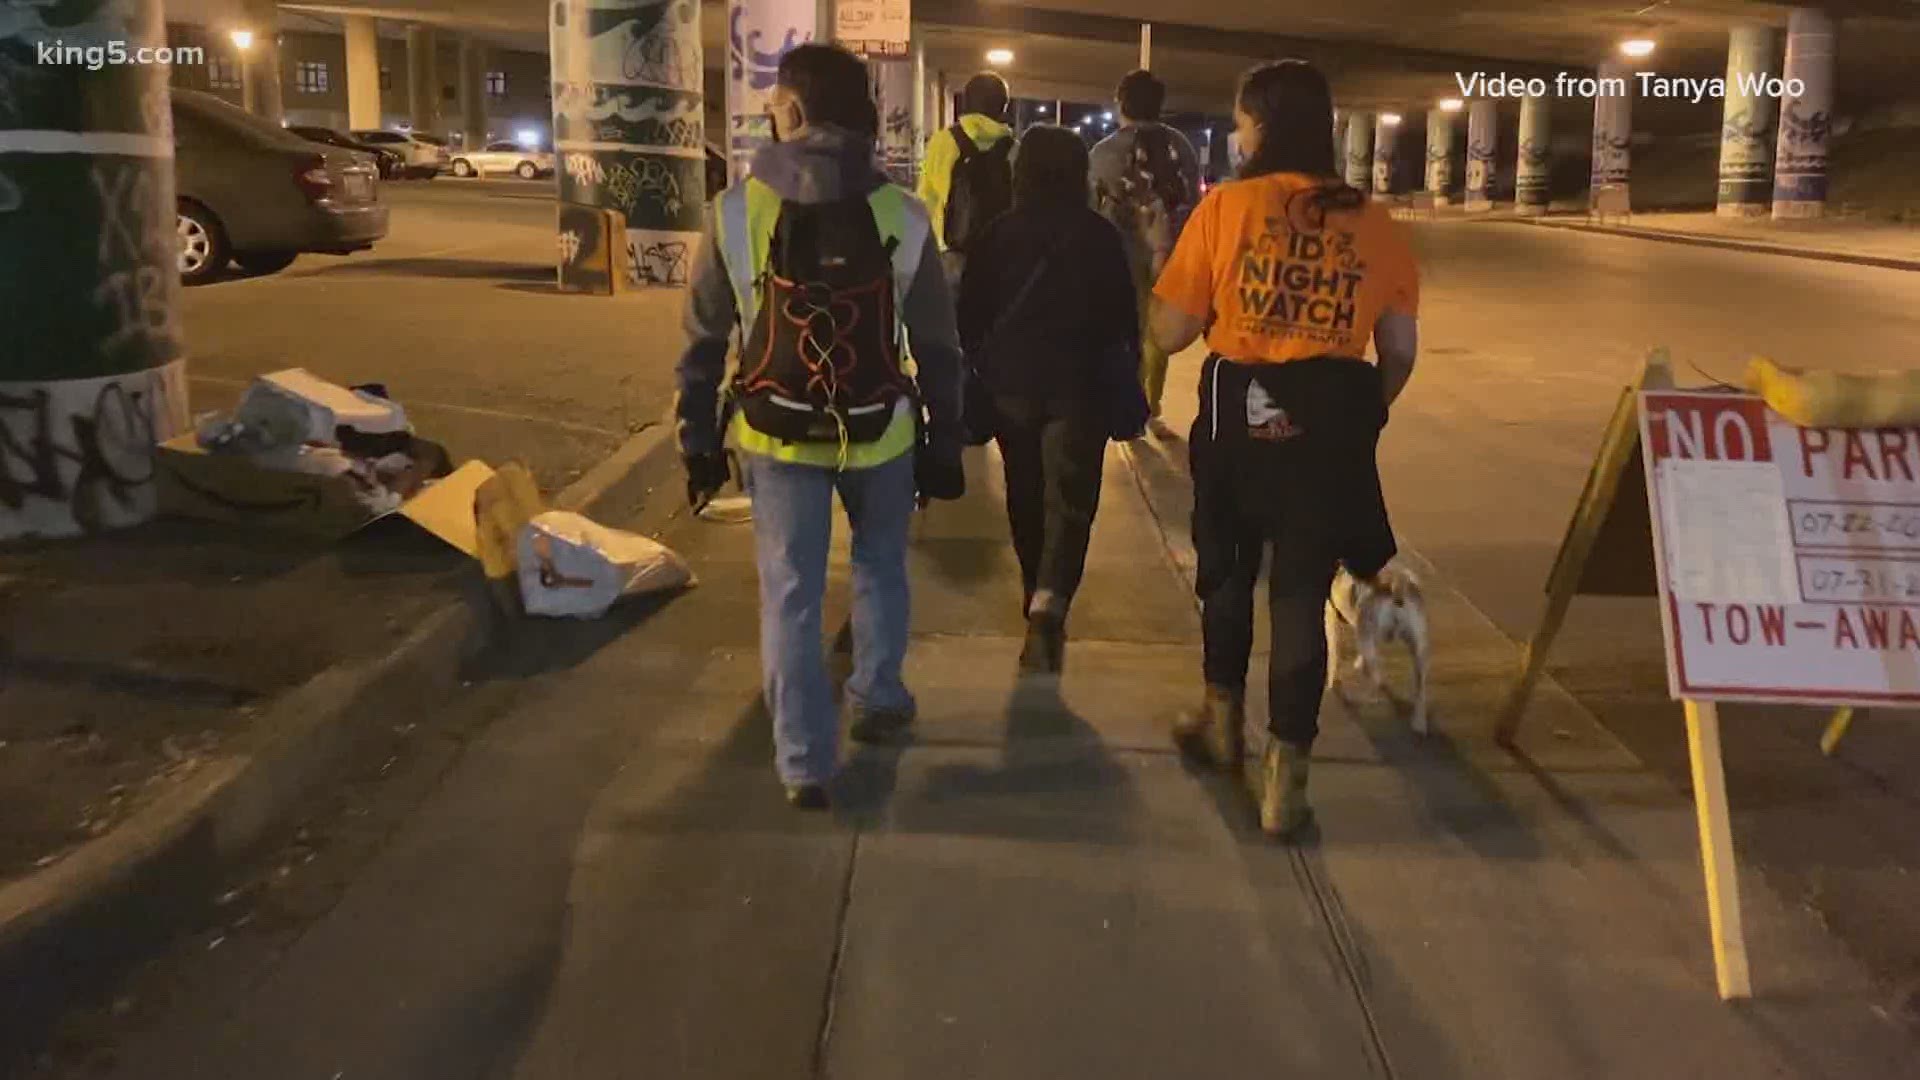 There's a new effort to curb crime in the Chinatown International District, where teams of unarmed volunteers are now patrolling the streets each night.